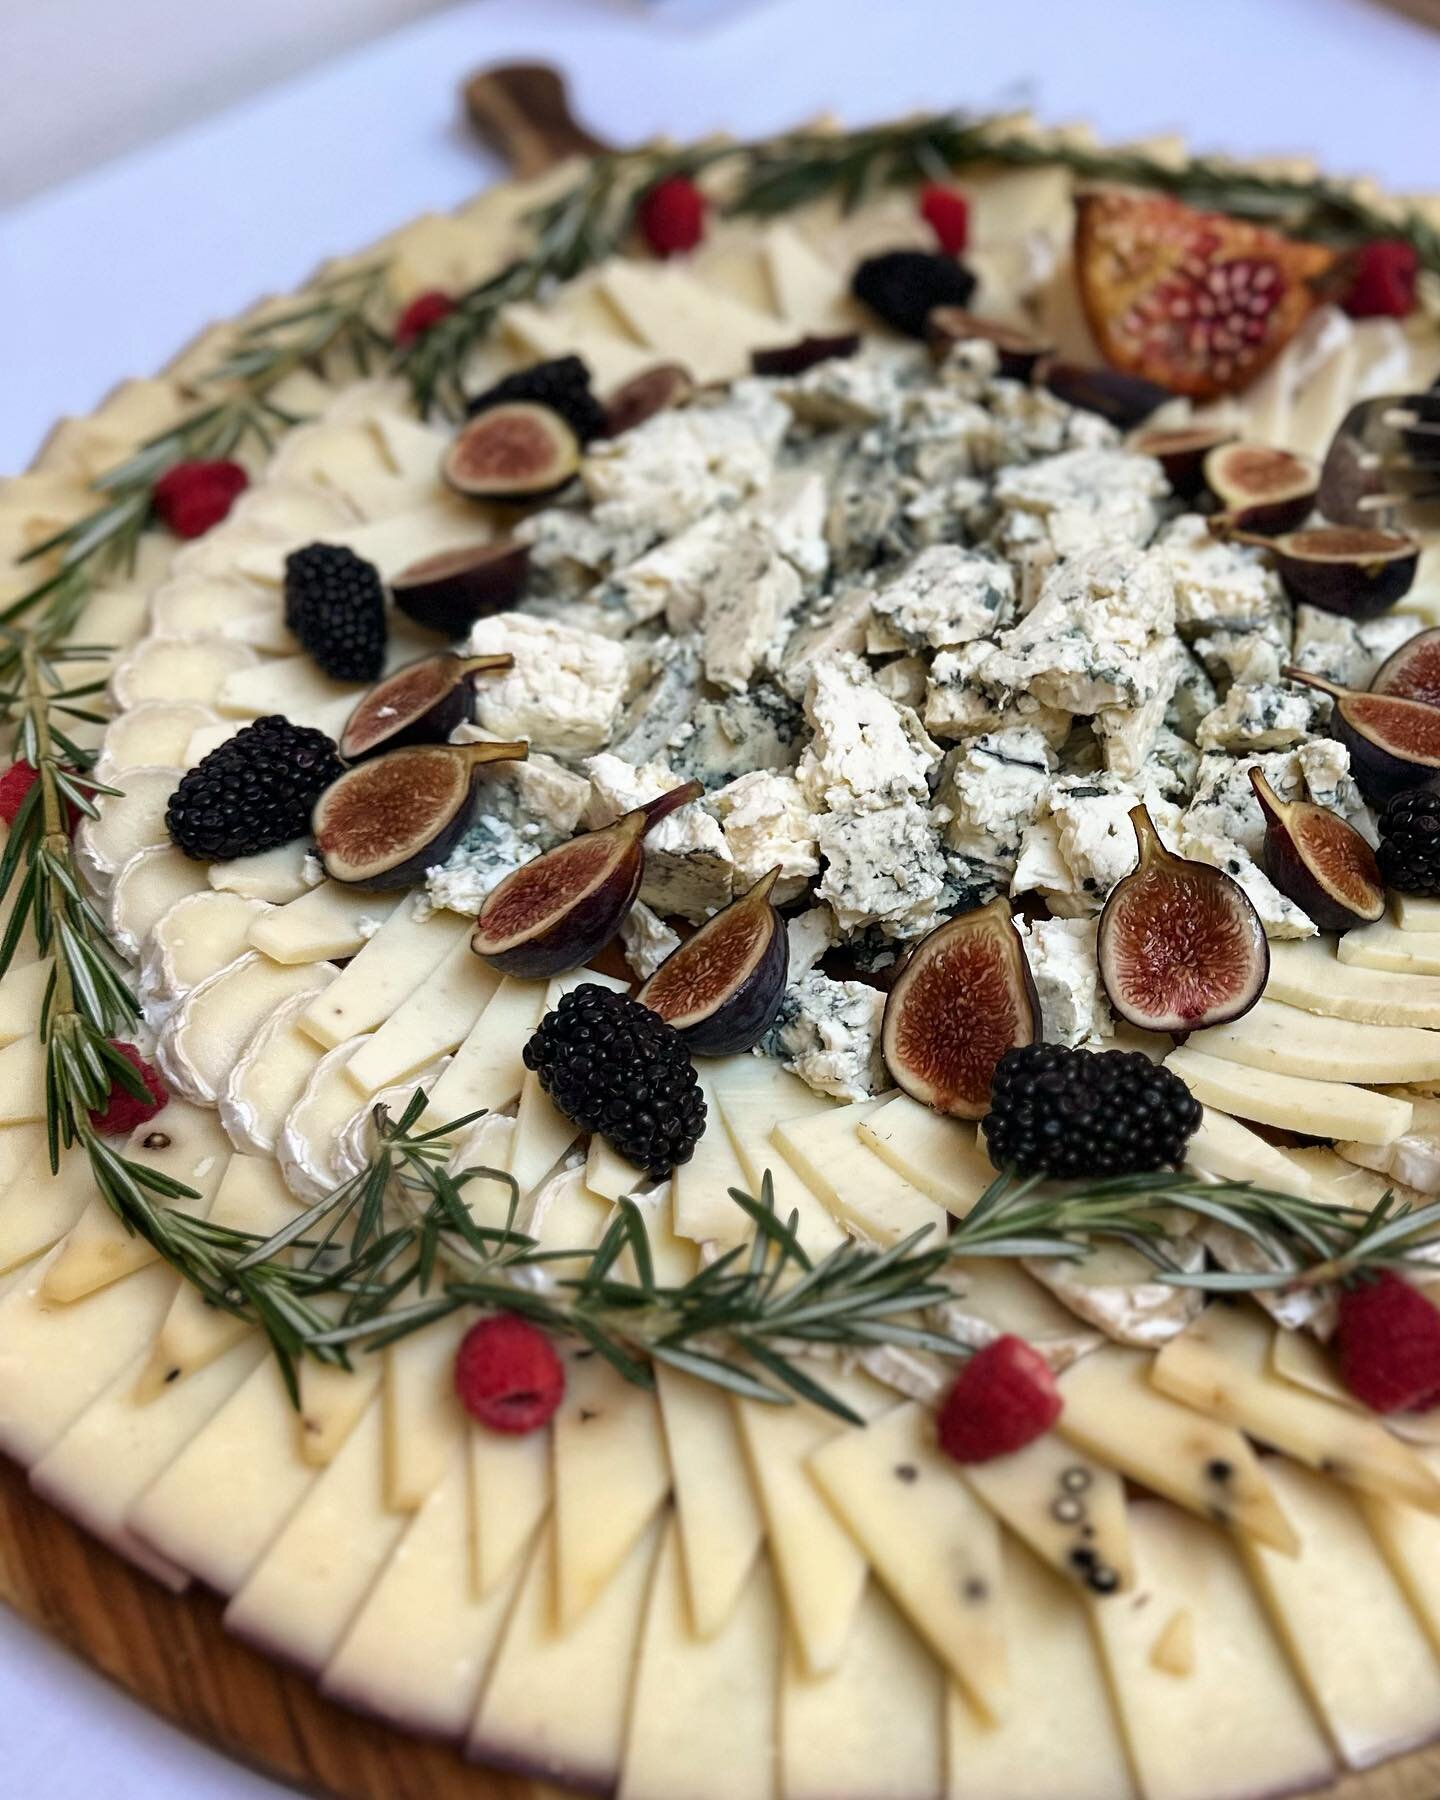 We had a blast catering the Montclair Film Festival launch party at LOOP this past Sunday!  We&rsquo;re a proud sponsor of this year&rsquo;s event!
#SkoposCatering #Catering #ProductionCatering #MontclairFilm #MontclairNJ #SocialEvents #CheeseBoard #